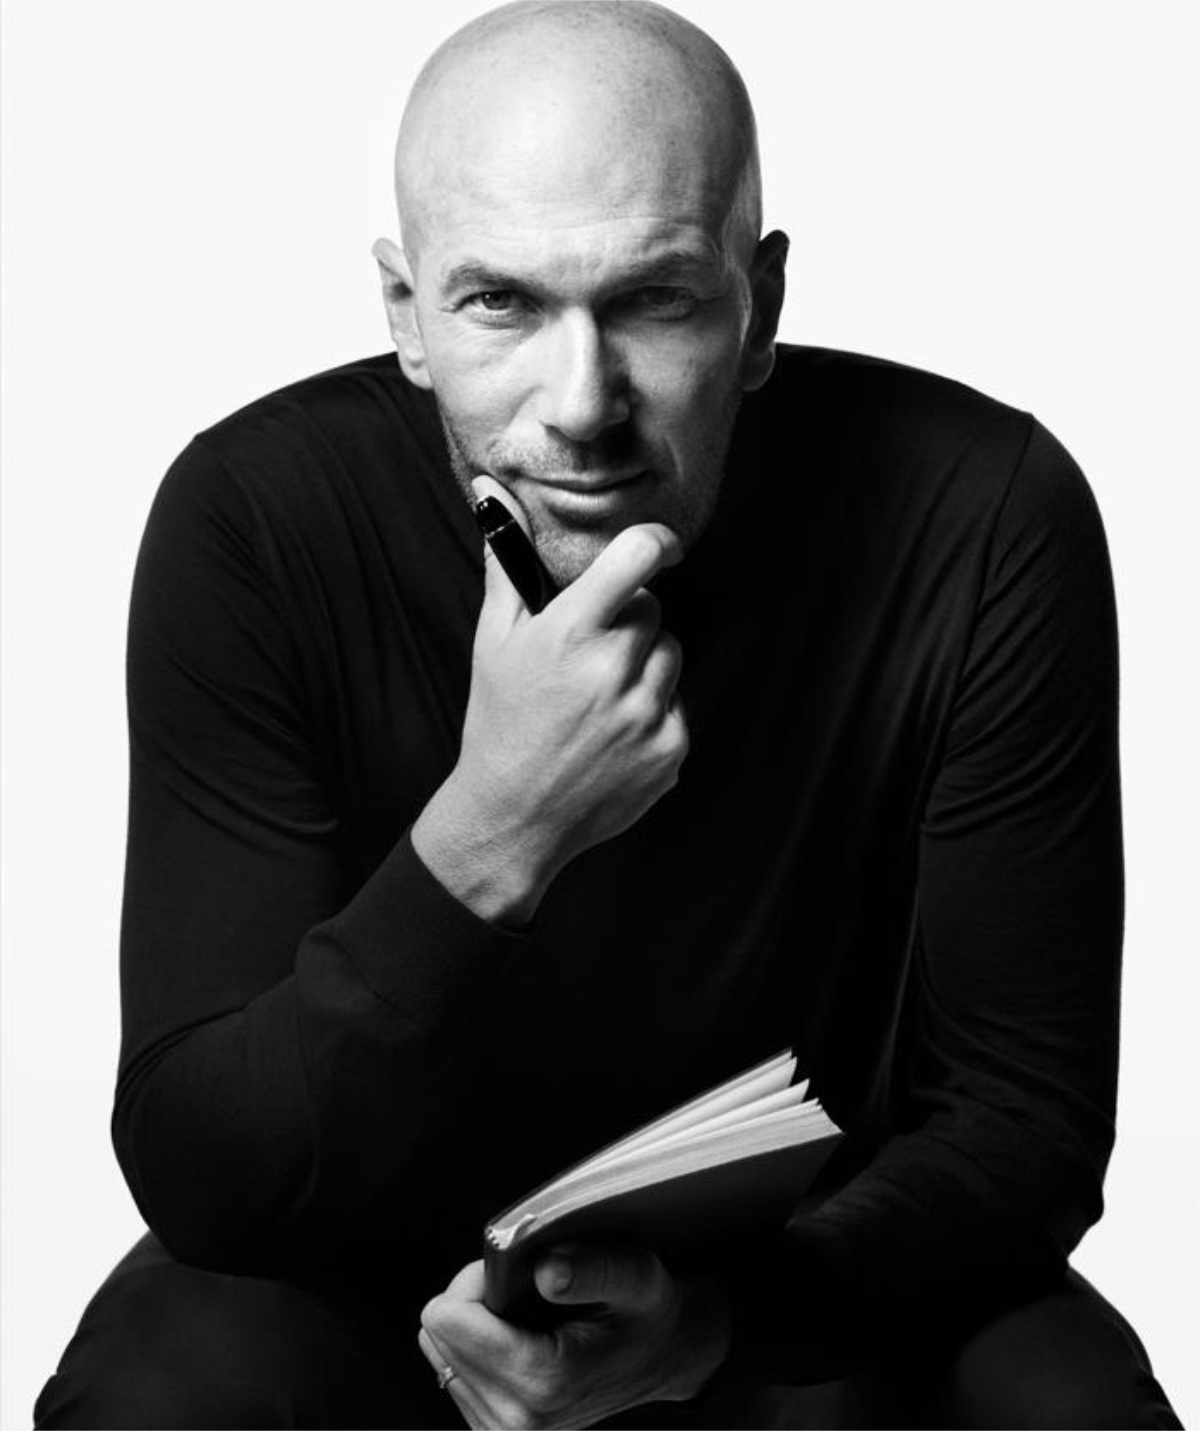 Montblanc Announced A New Partnership With Zinédine Zidane